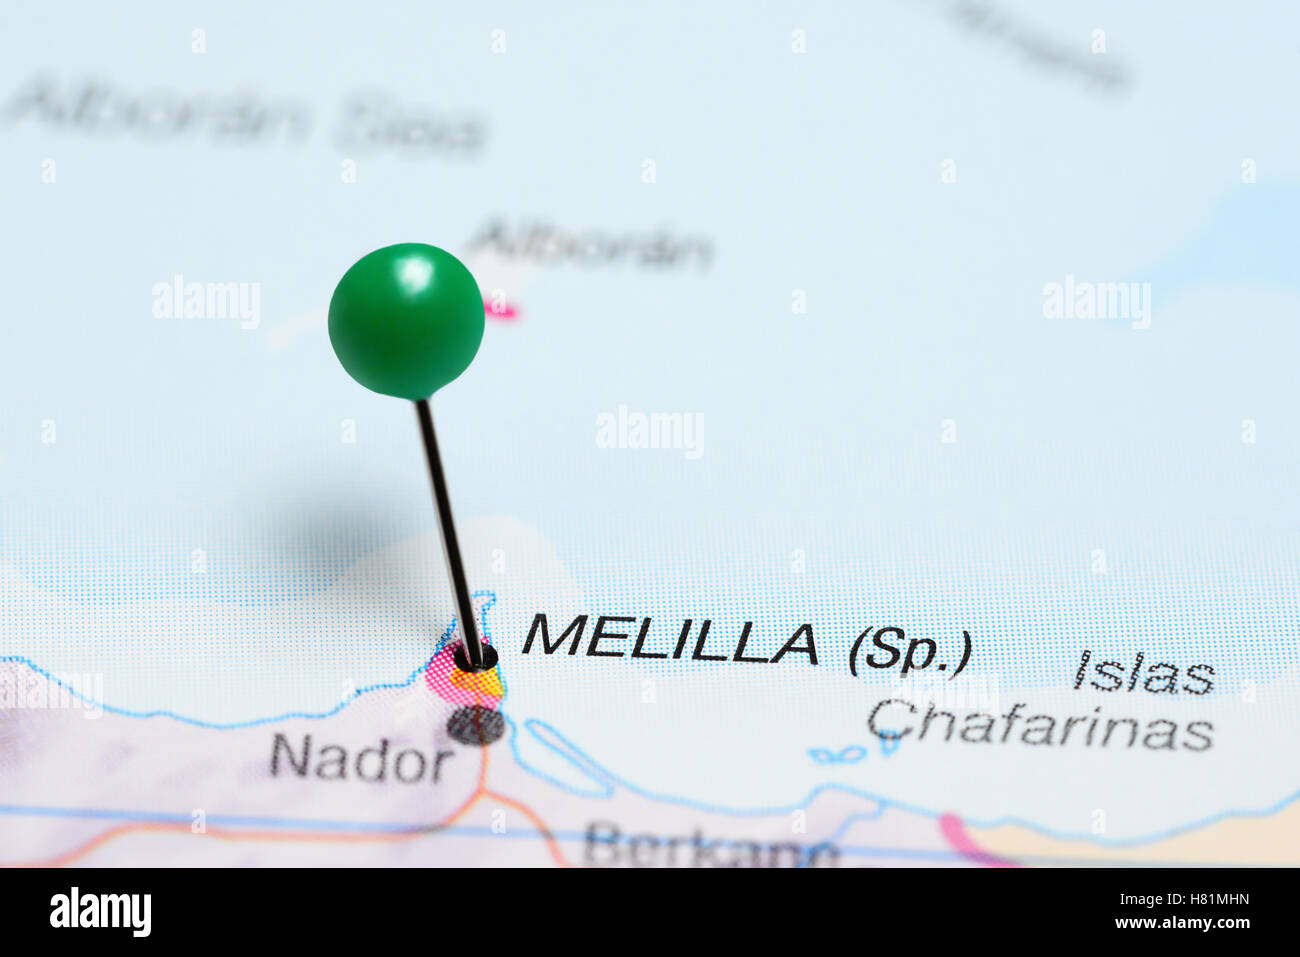 Melilla pinned on a map of Spain Stock Photo